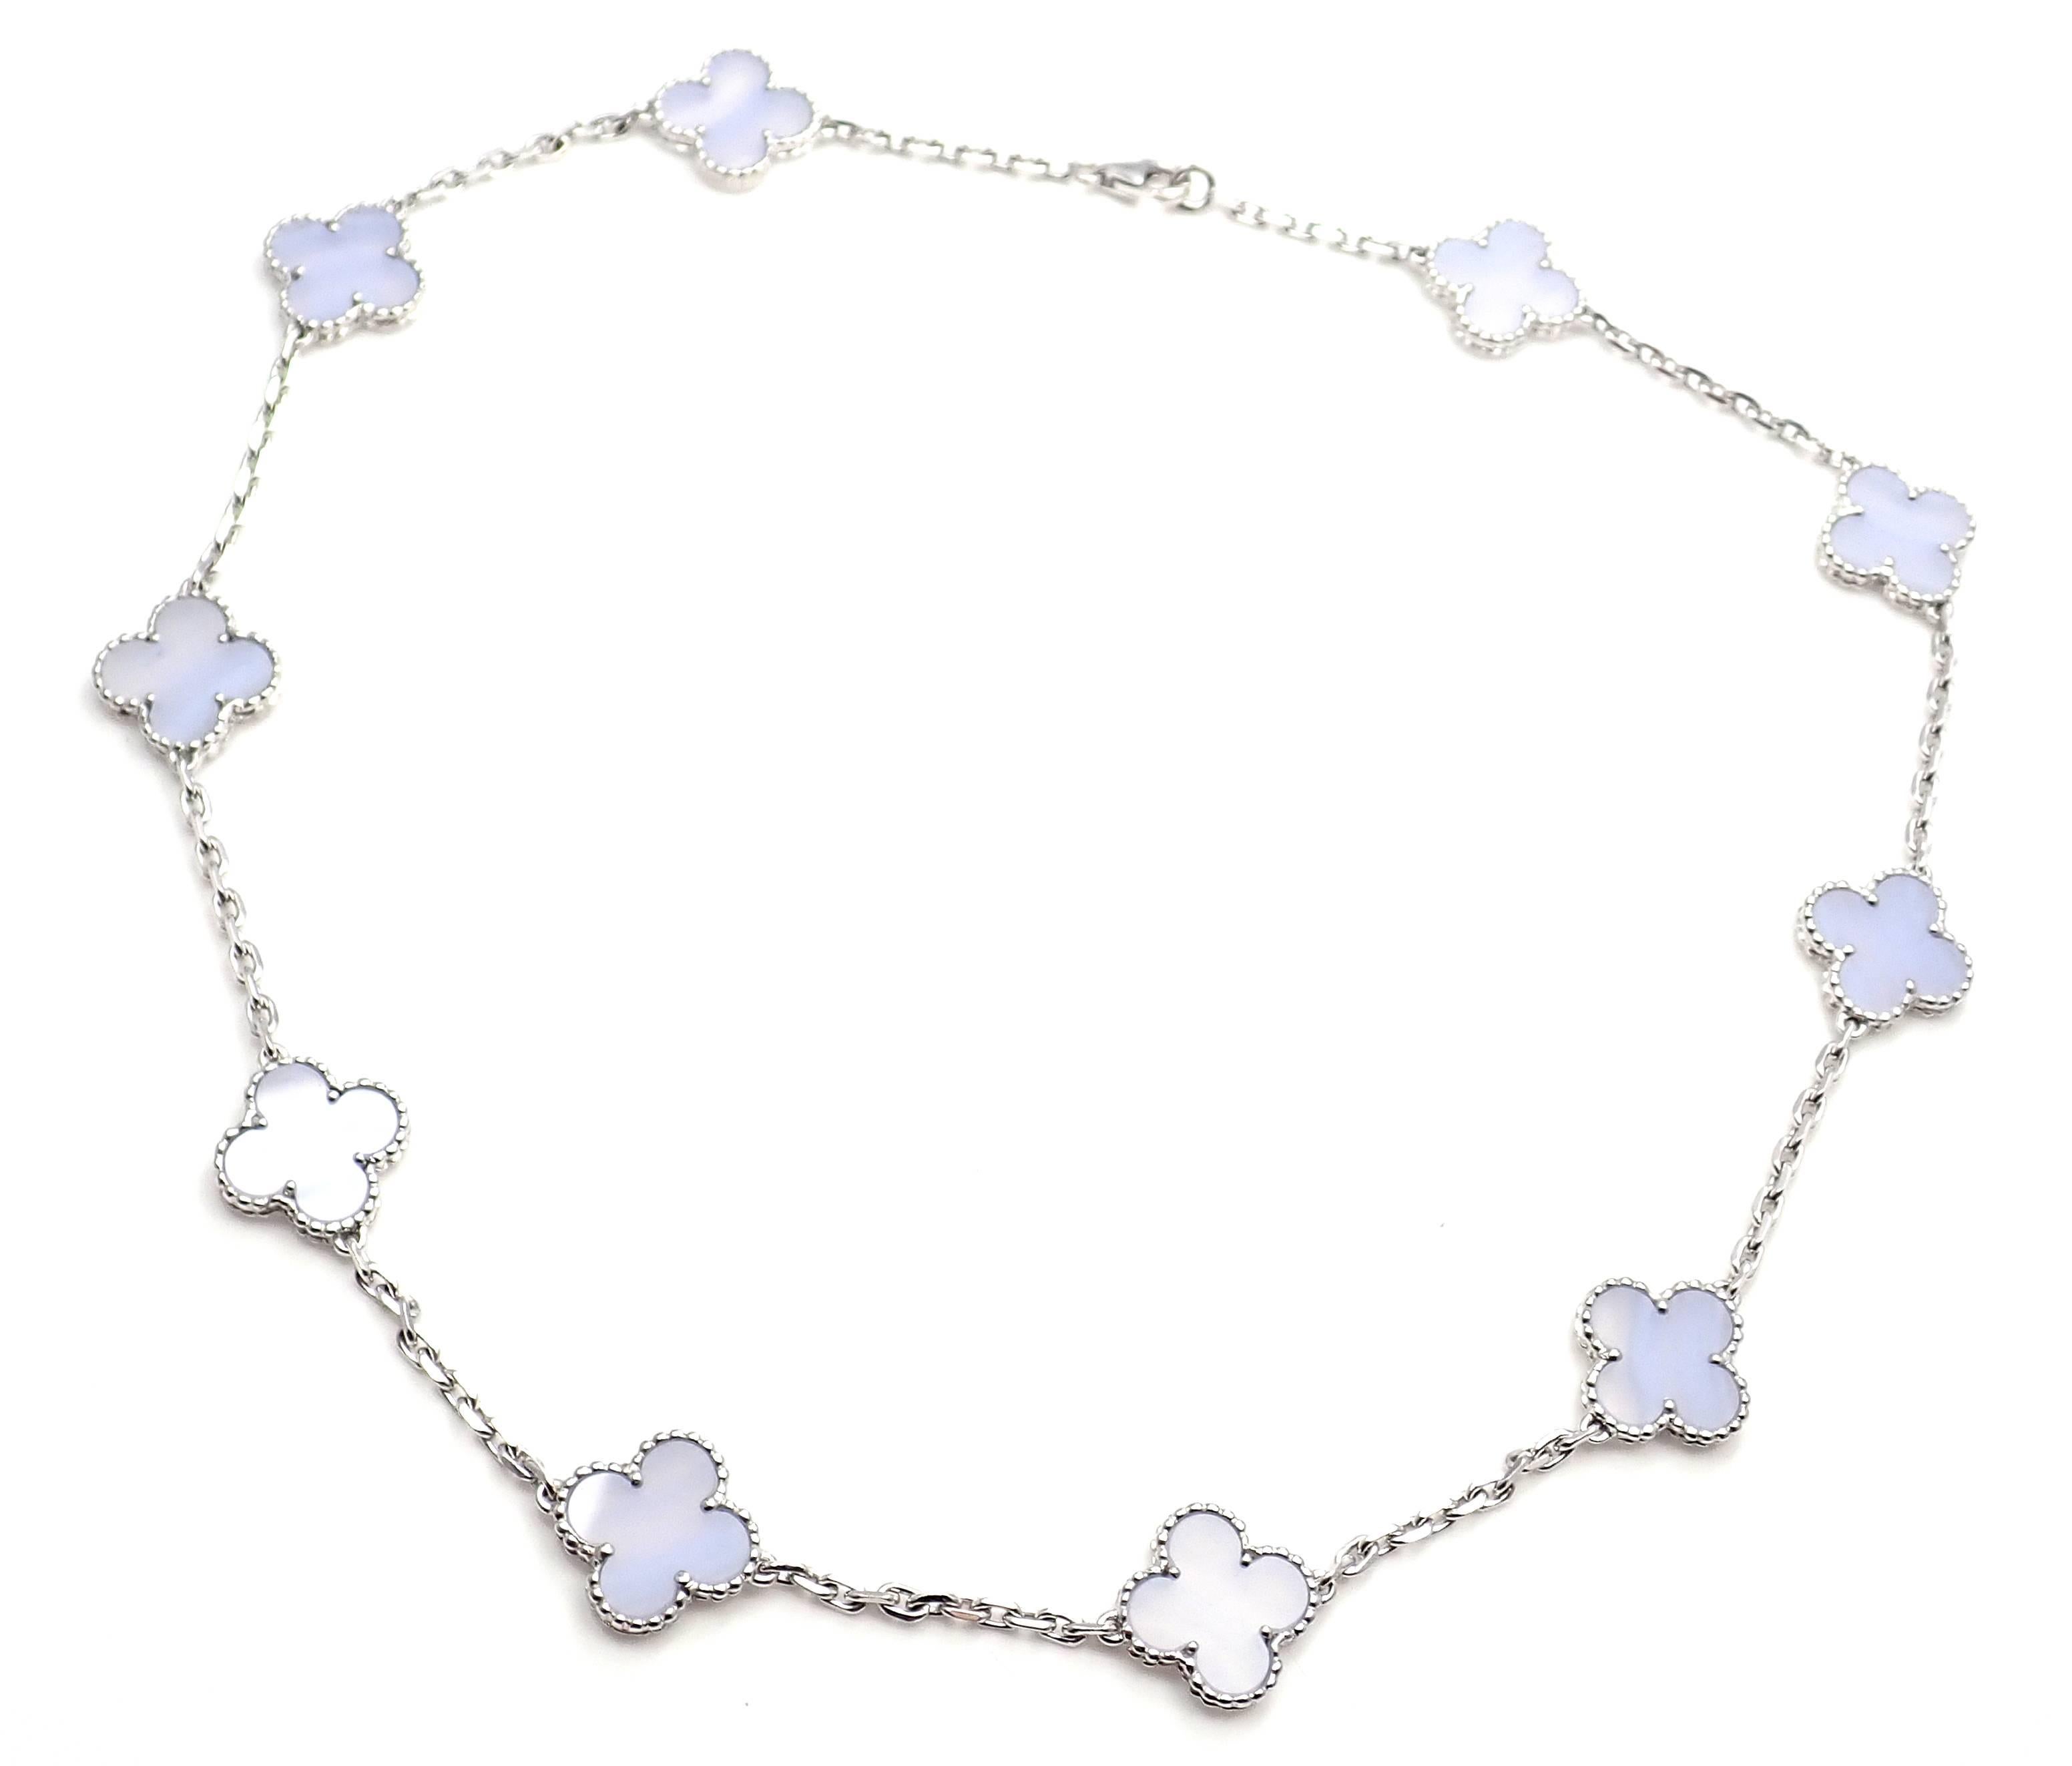 18k White Gold Vintage Alhambra Chalcedony Necklace by Van Cleef & Arpels. 
With 10 motifs of chalcedony alhambra stones 15mm each
This necklace comes with Van Cleef & Arpels certiciate from VCA store.
Details: 
Length: 17